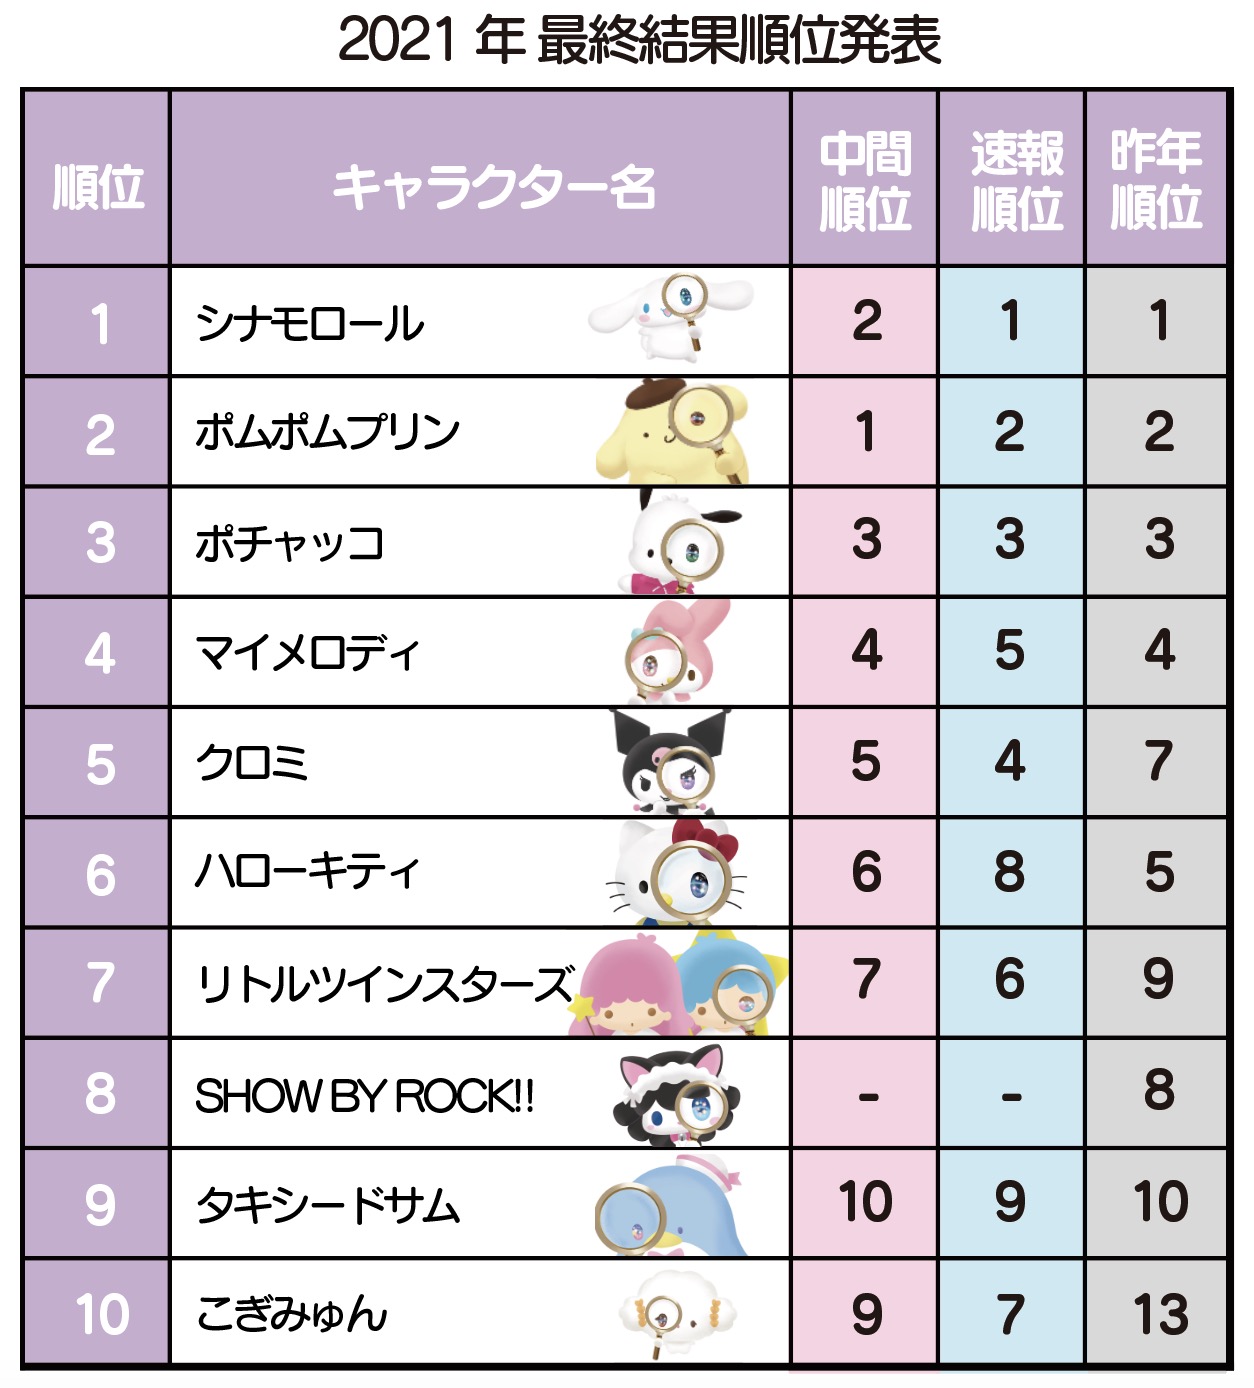 The most popular Sanrio characters